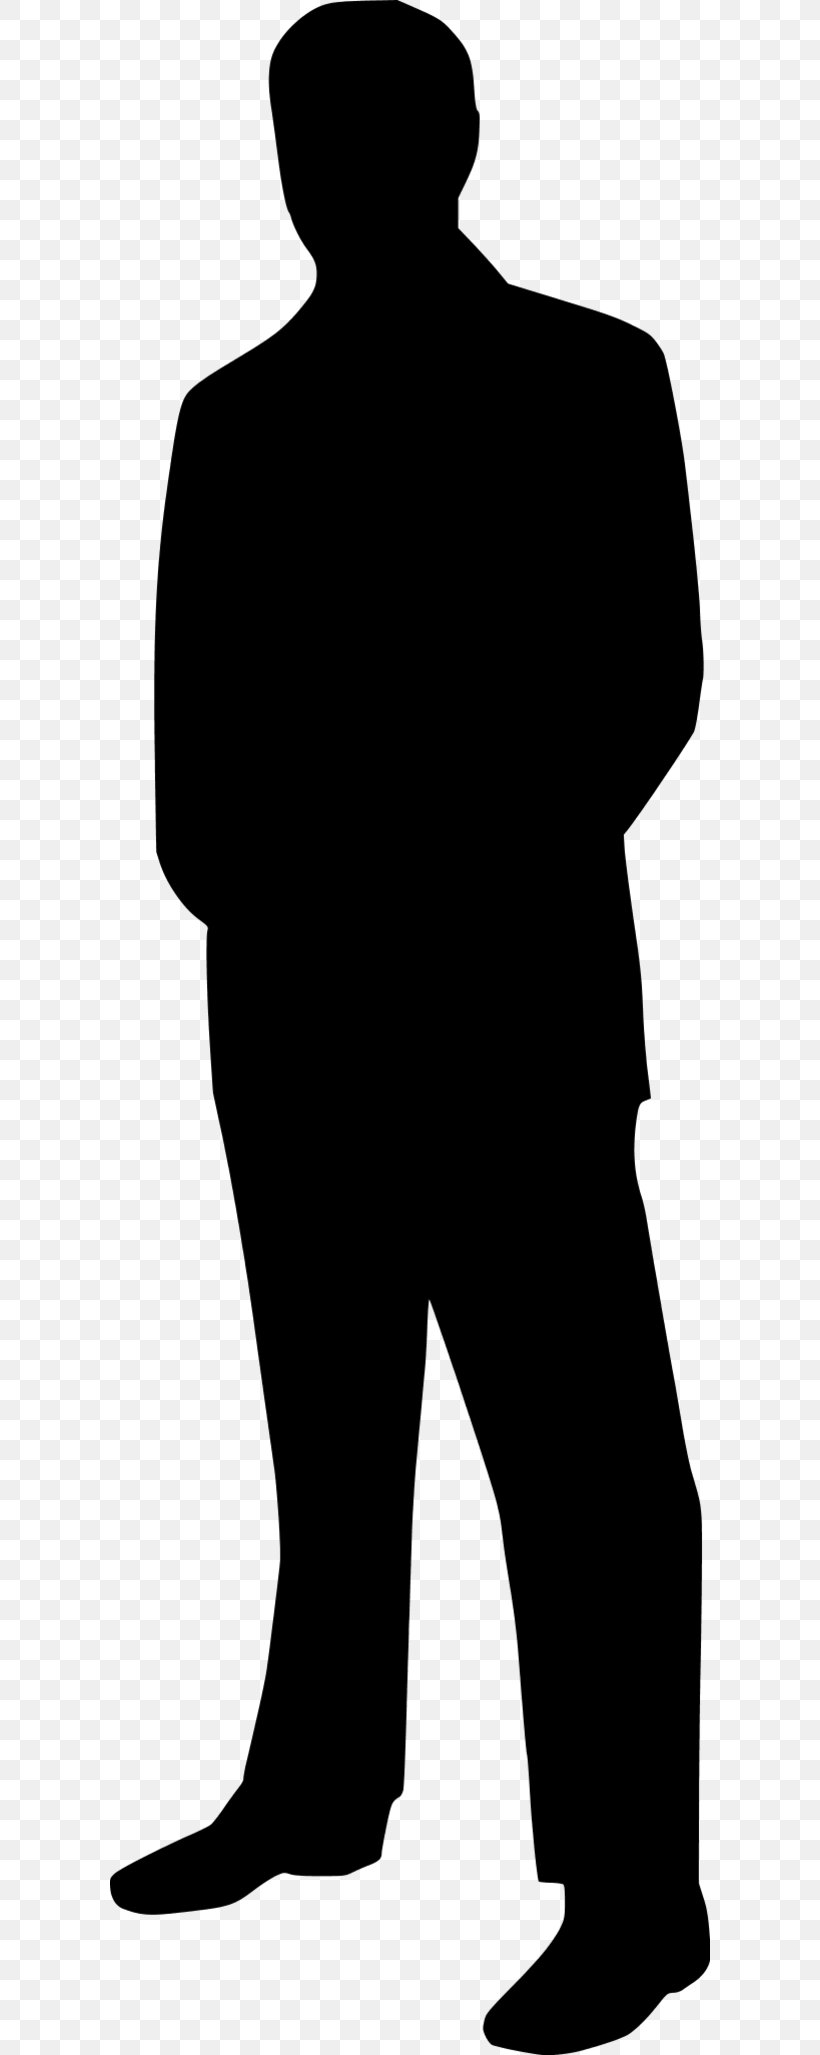 Silhouette Man Clip Art, PNG, 600x2055px, Silhouette, Black, Black And White, Businessperson, Female Download Free